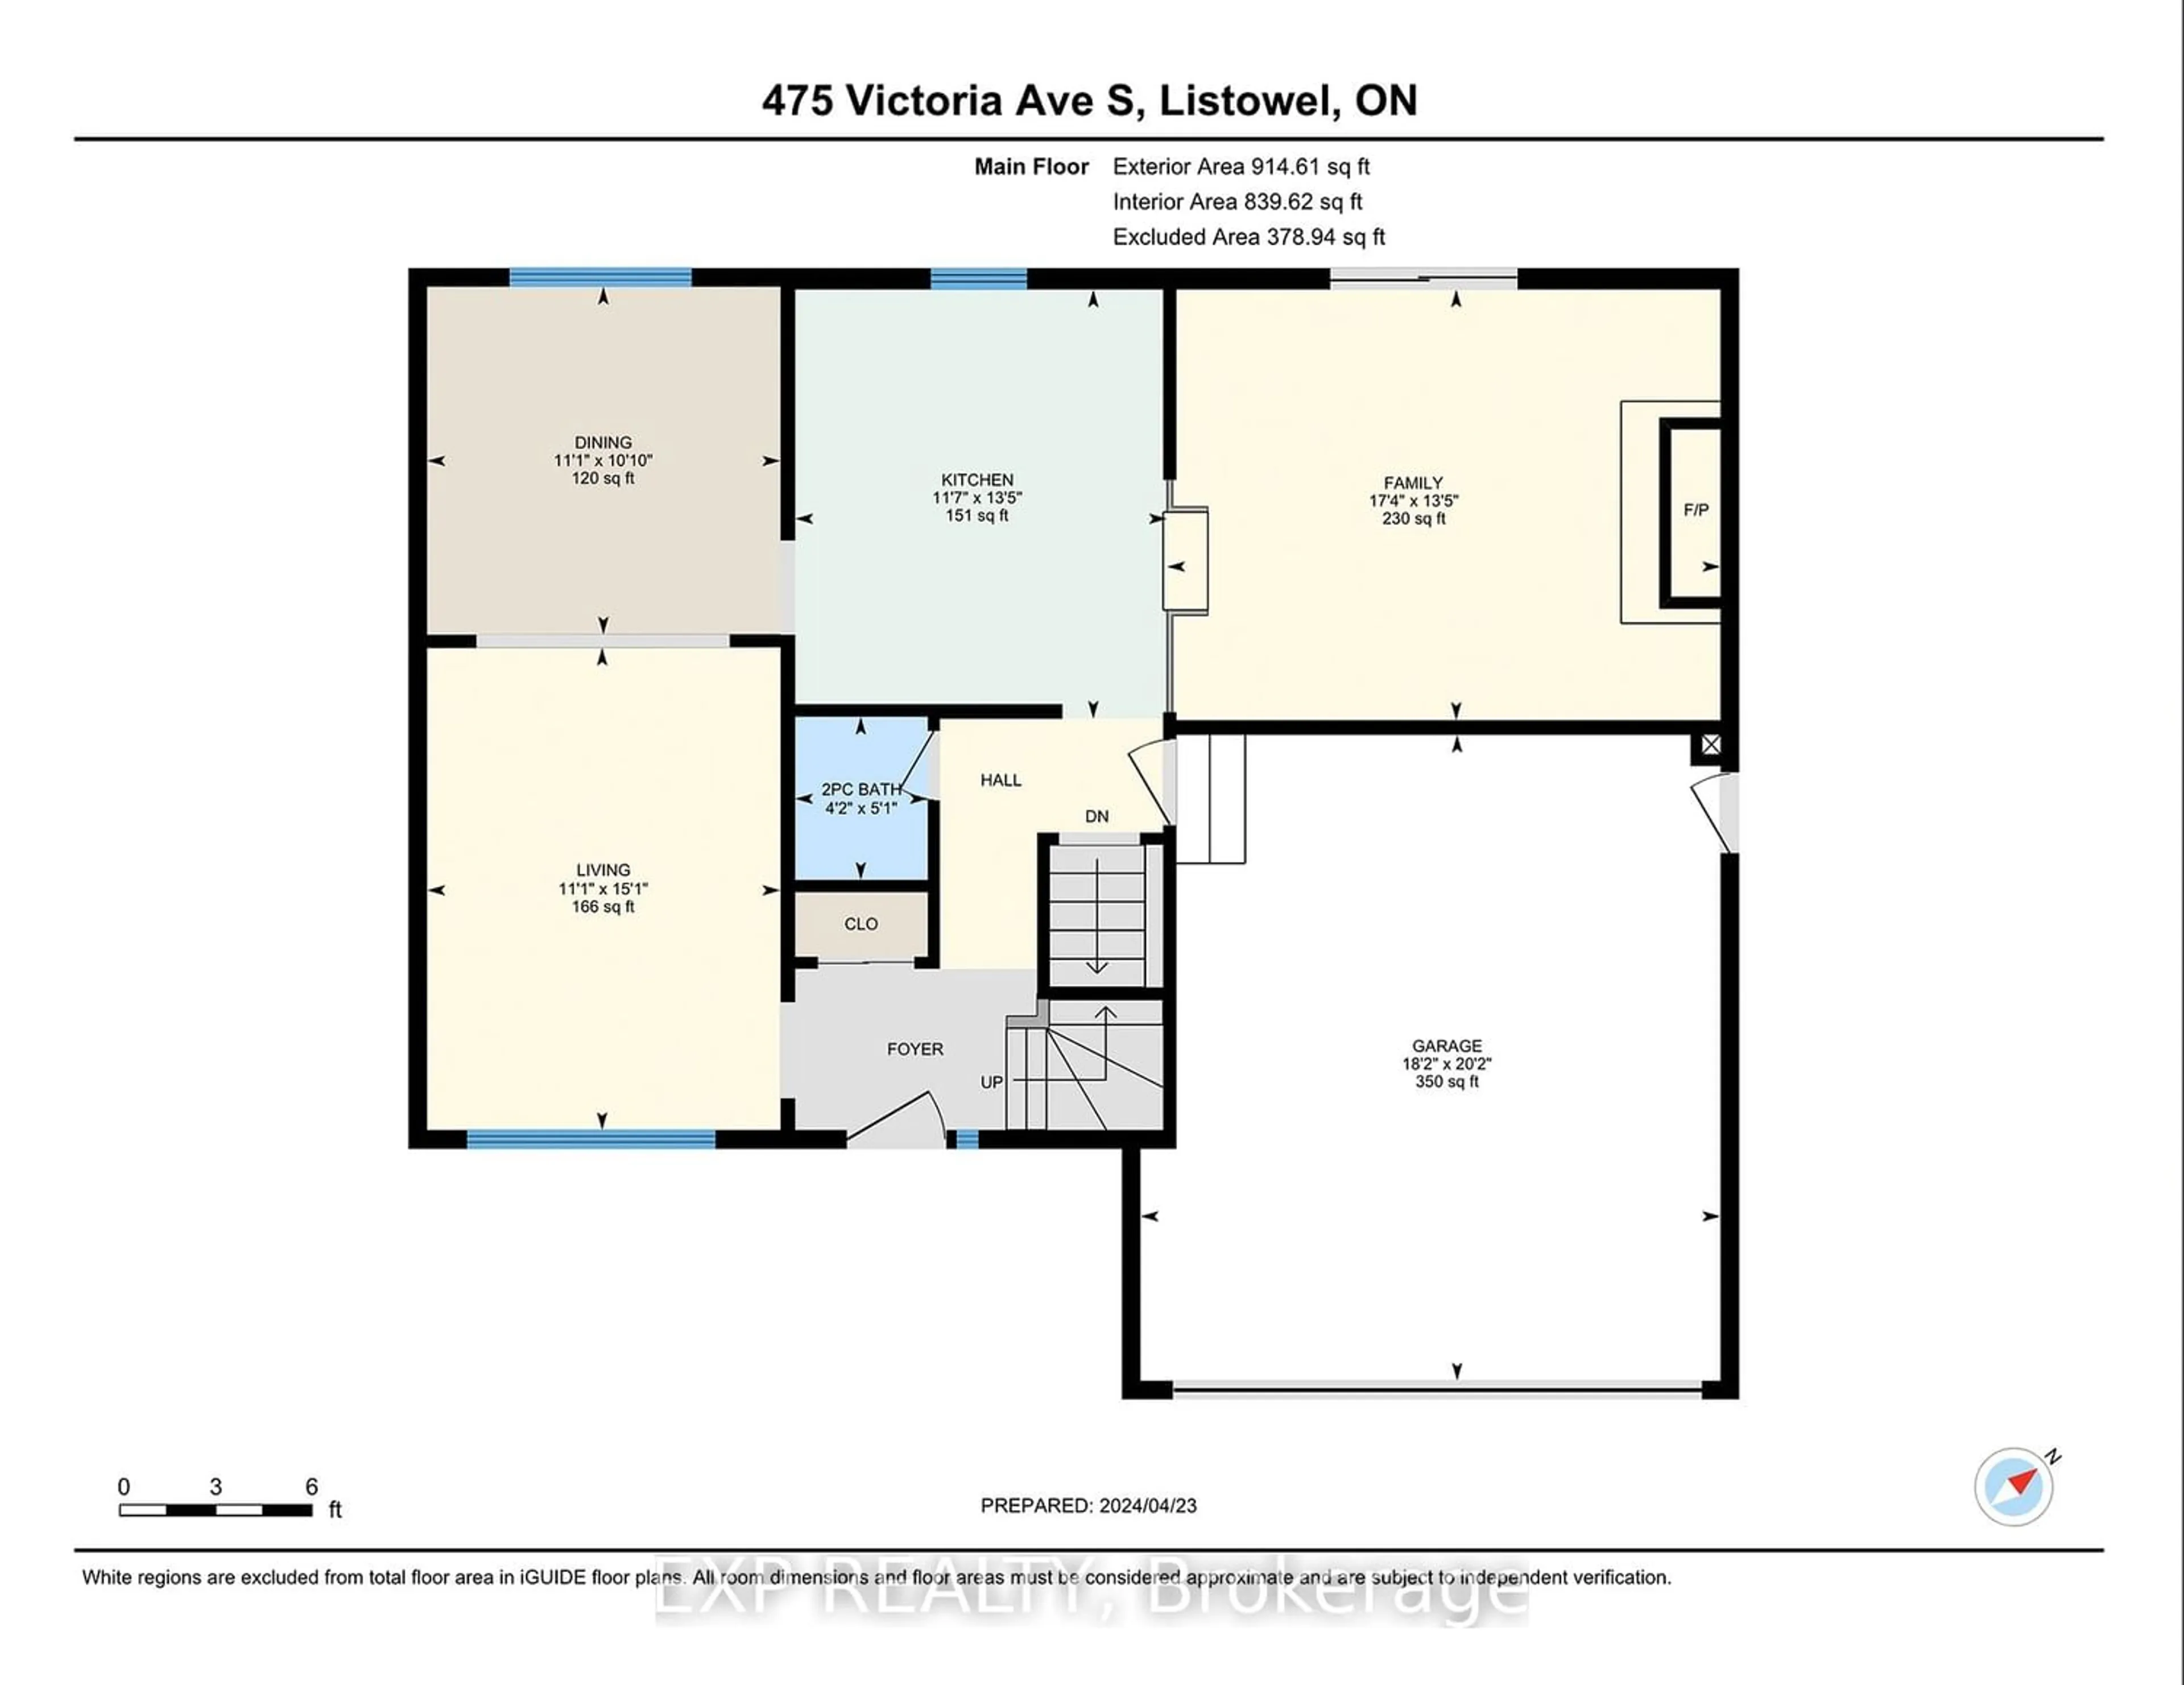 Floor plan for 475 Victoria Ave, North Perth Ontario N4W 3N7